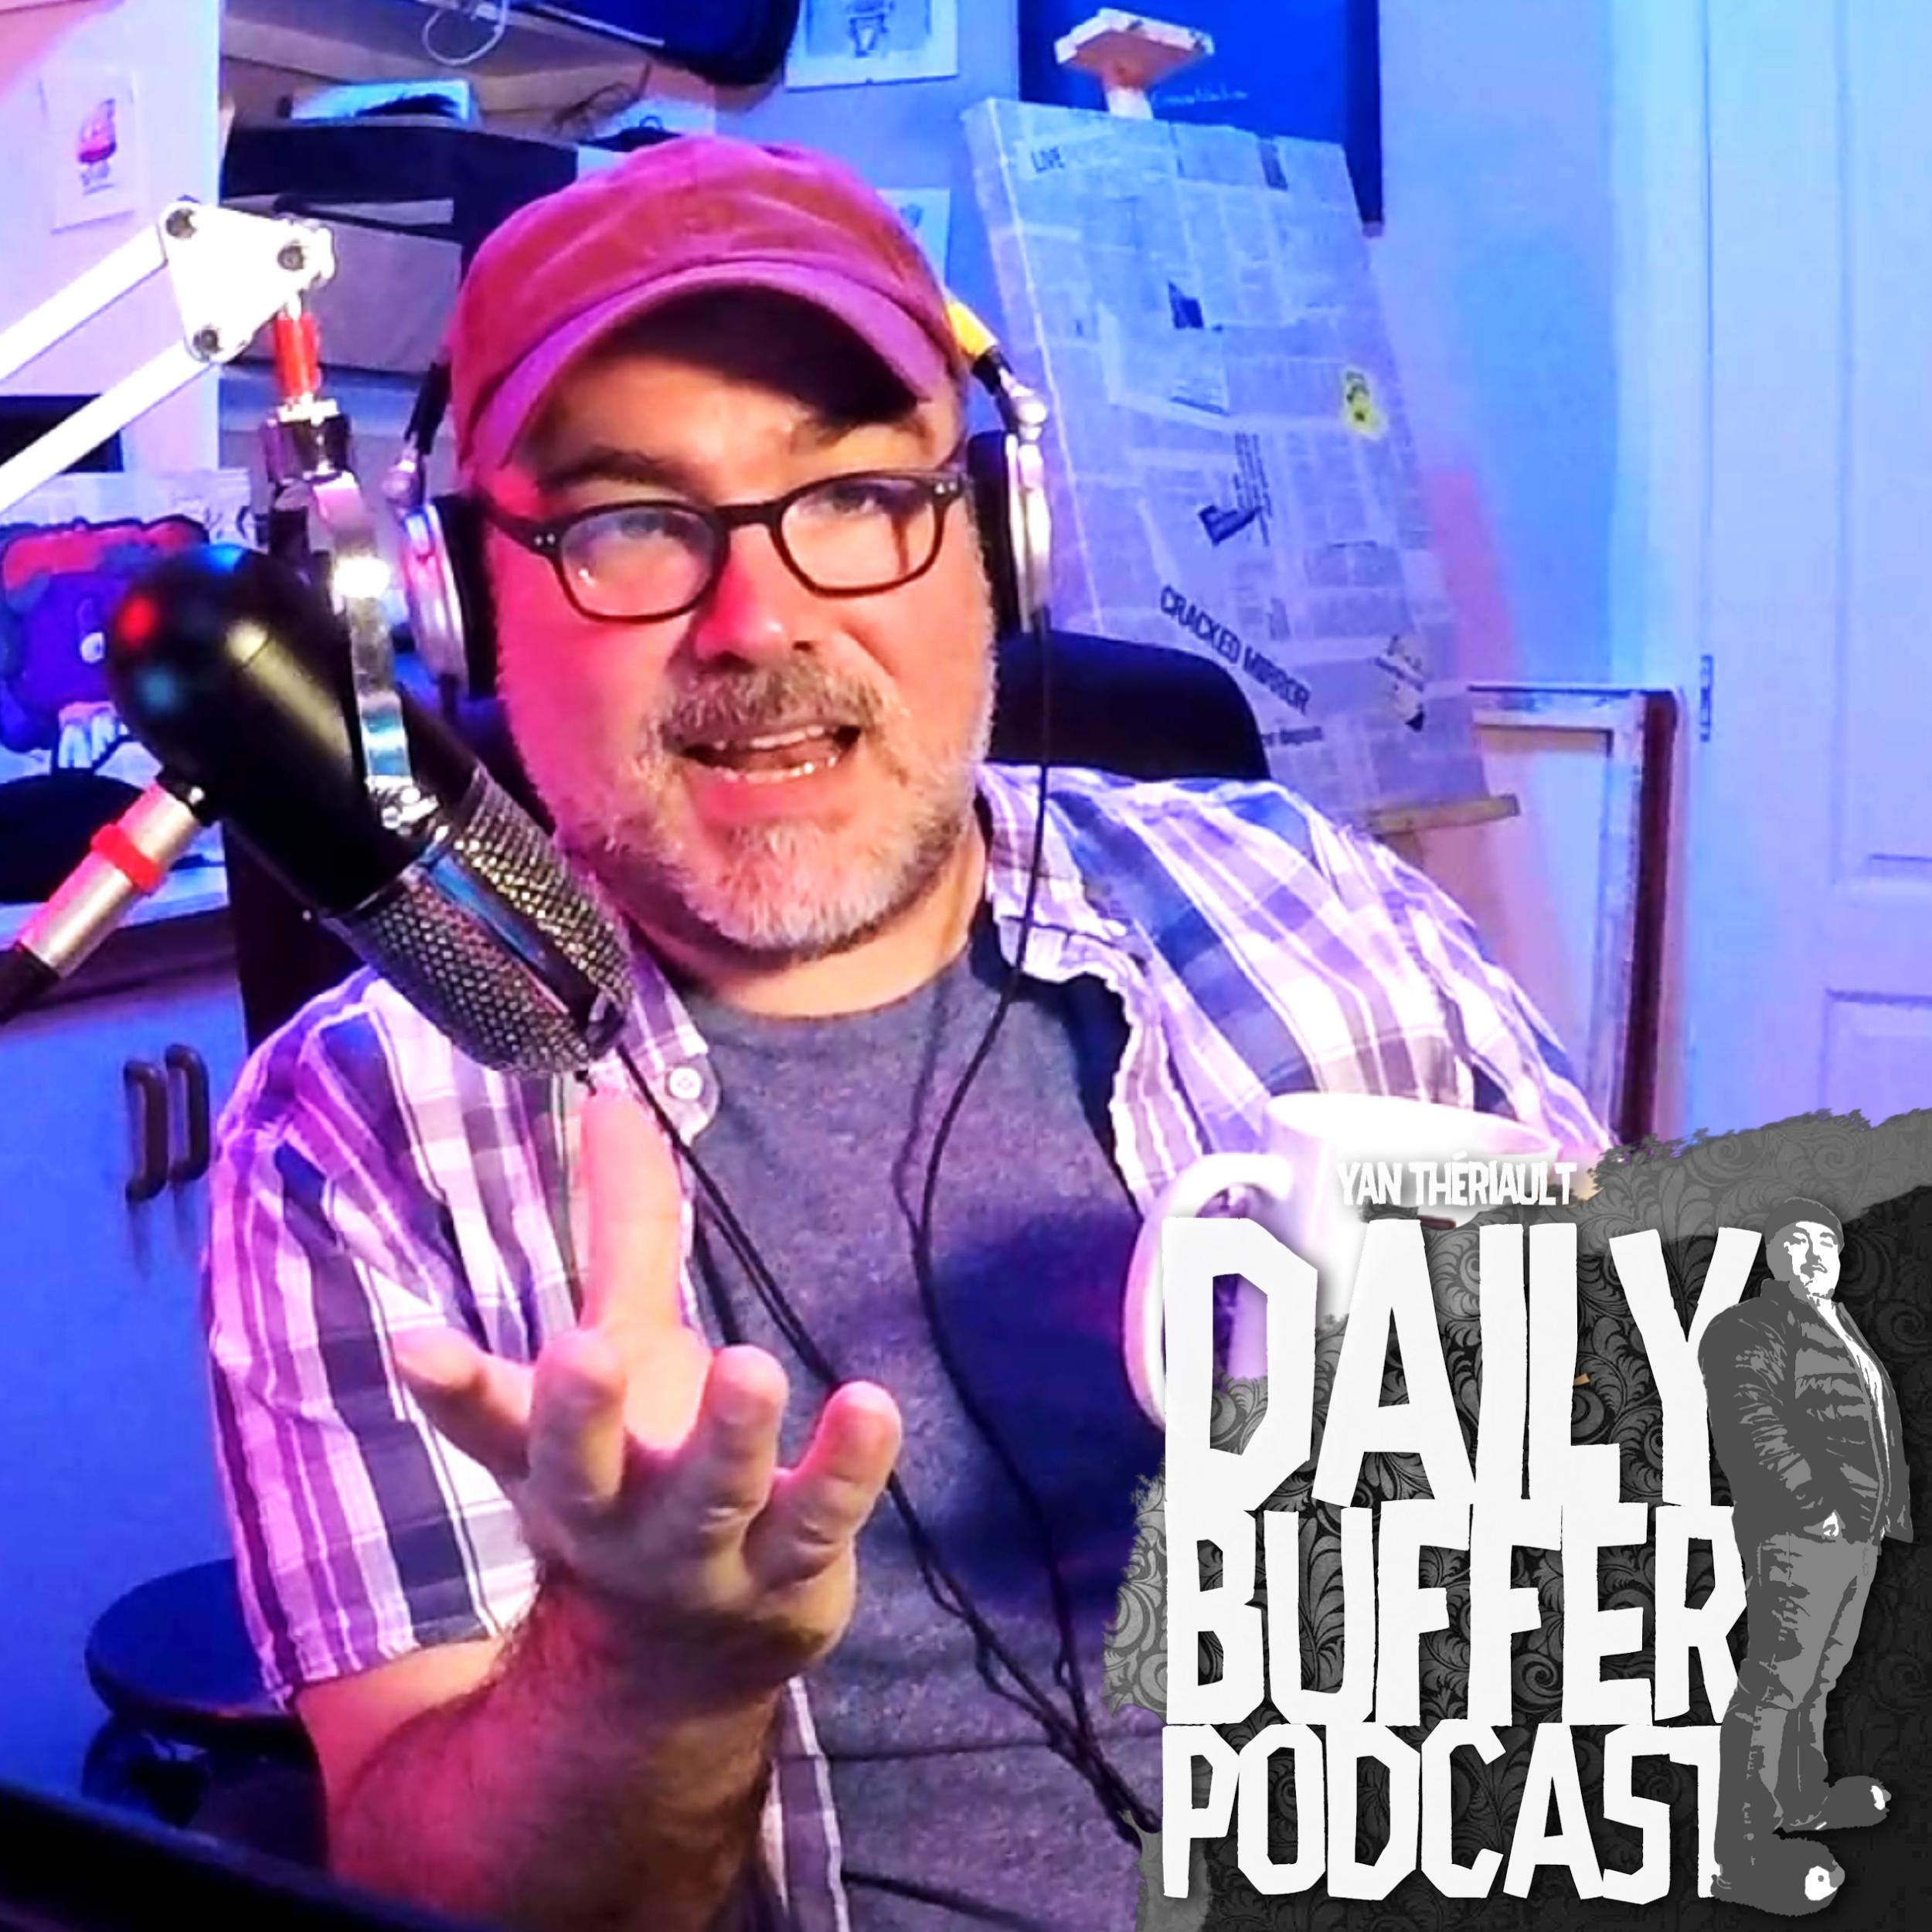 Lundi Sujets Libres - Daily Buffer Podcast - 2019 06 17